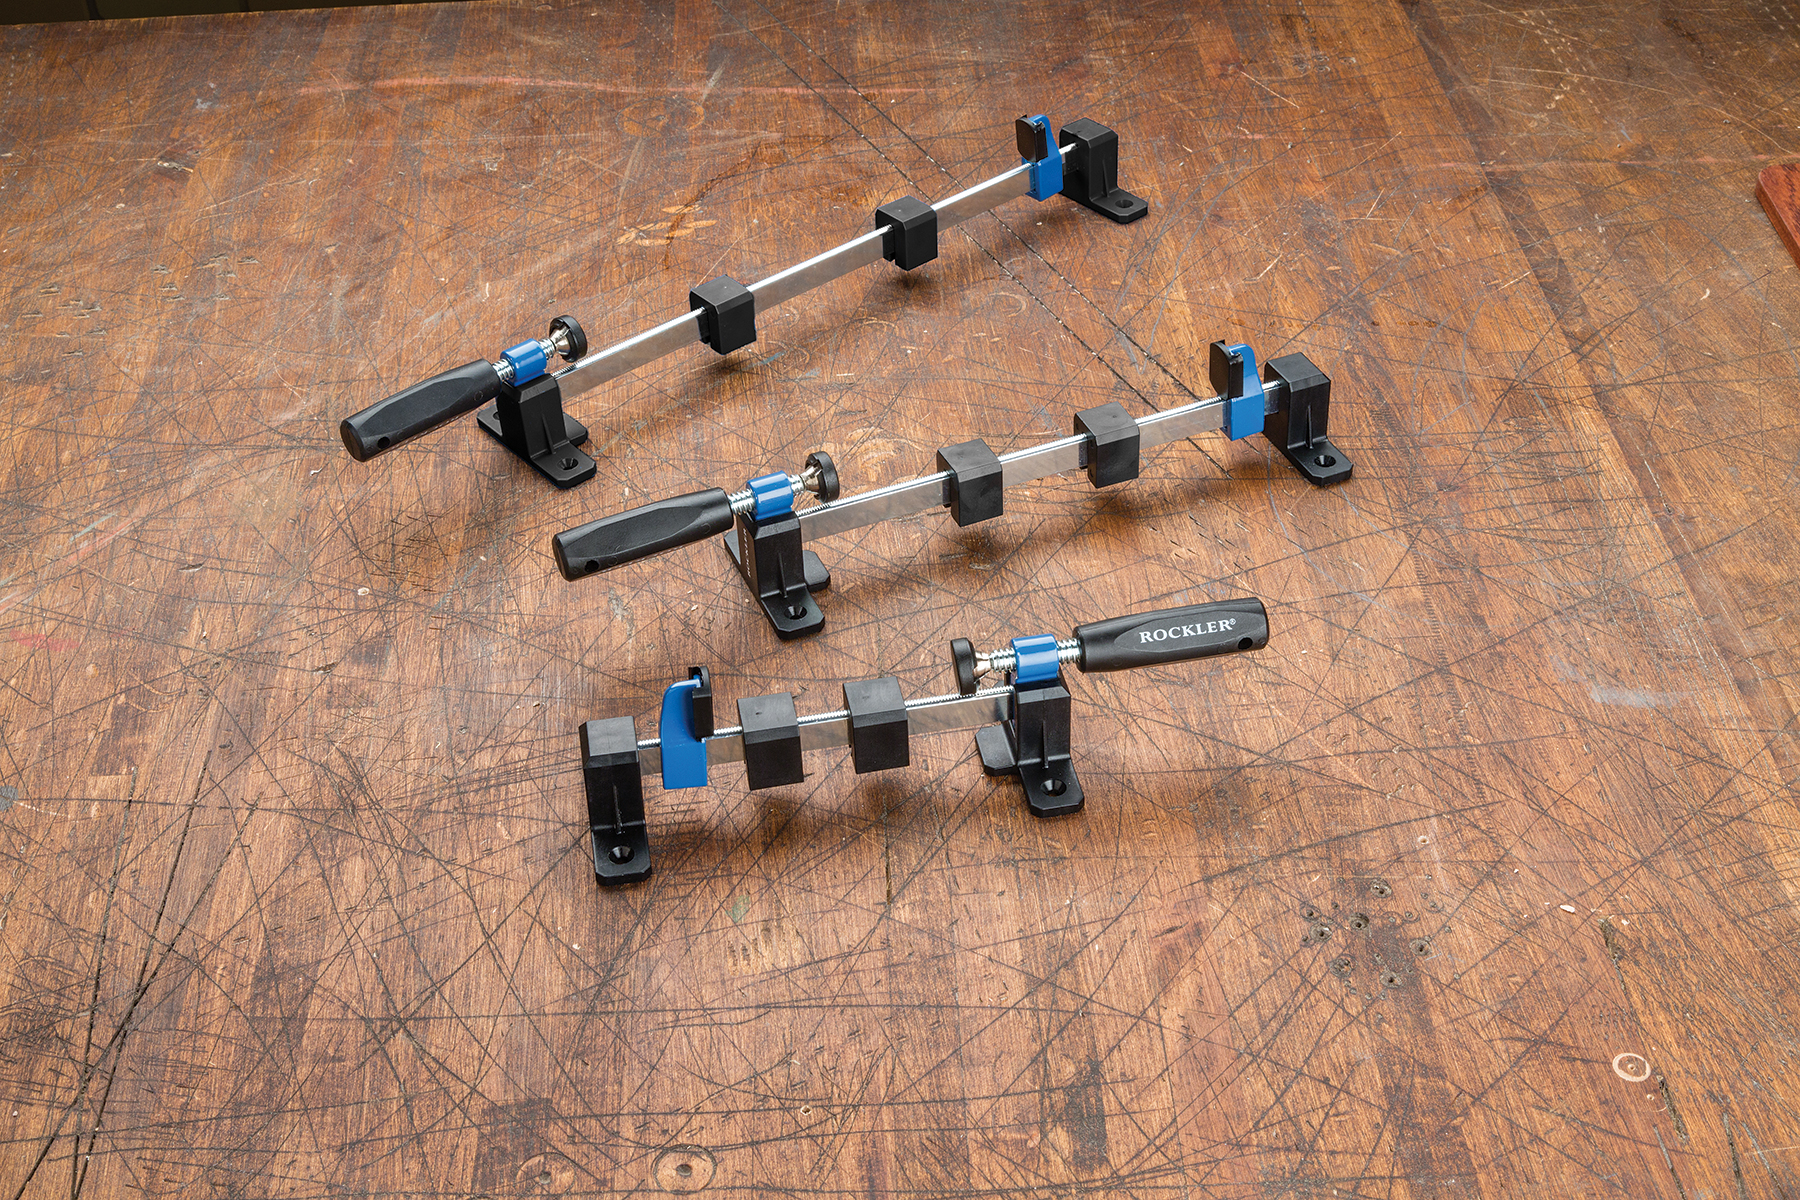 Available as sets: 5", 8" and 12" Clamp-It® Bar Clamps plus Mini Sure-Foot® Conversion Kit